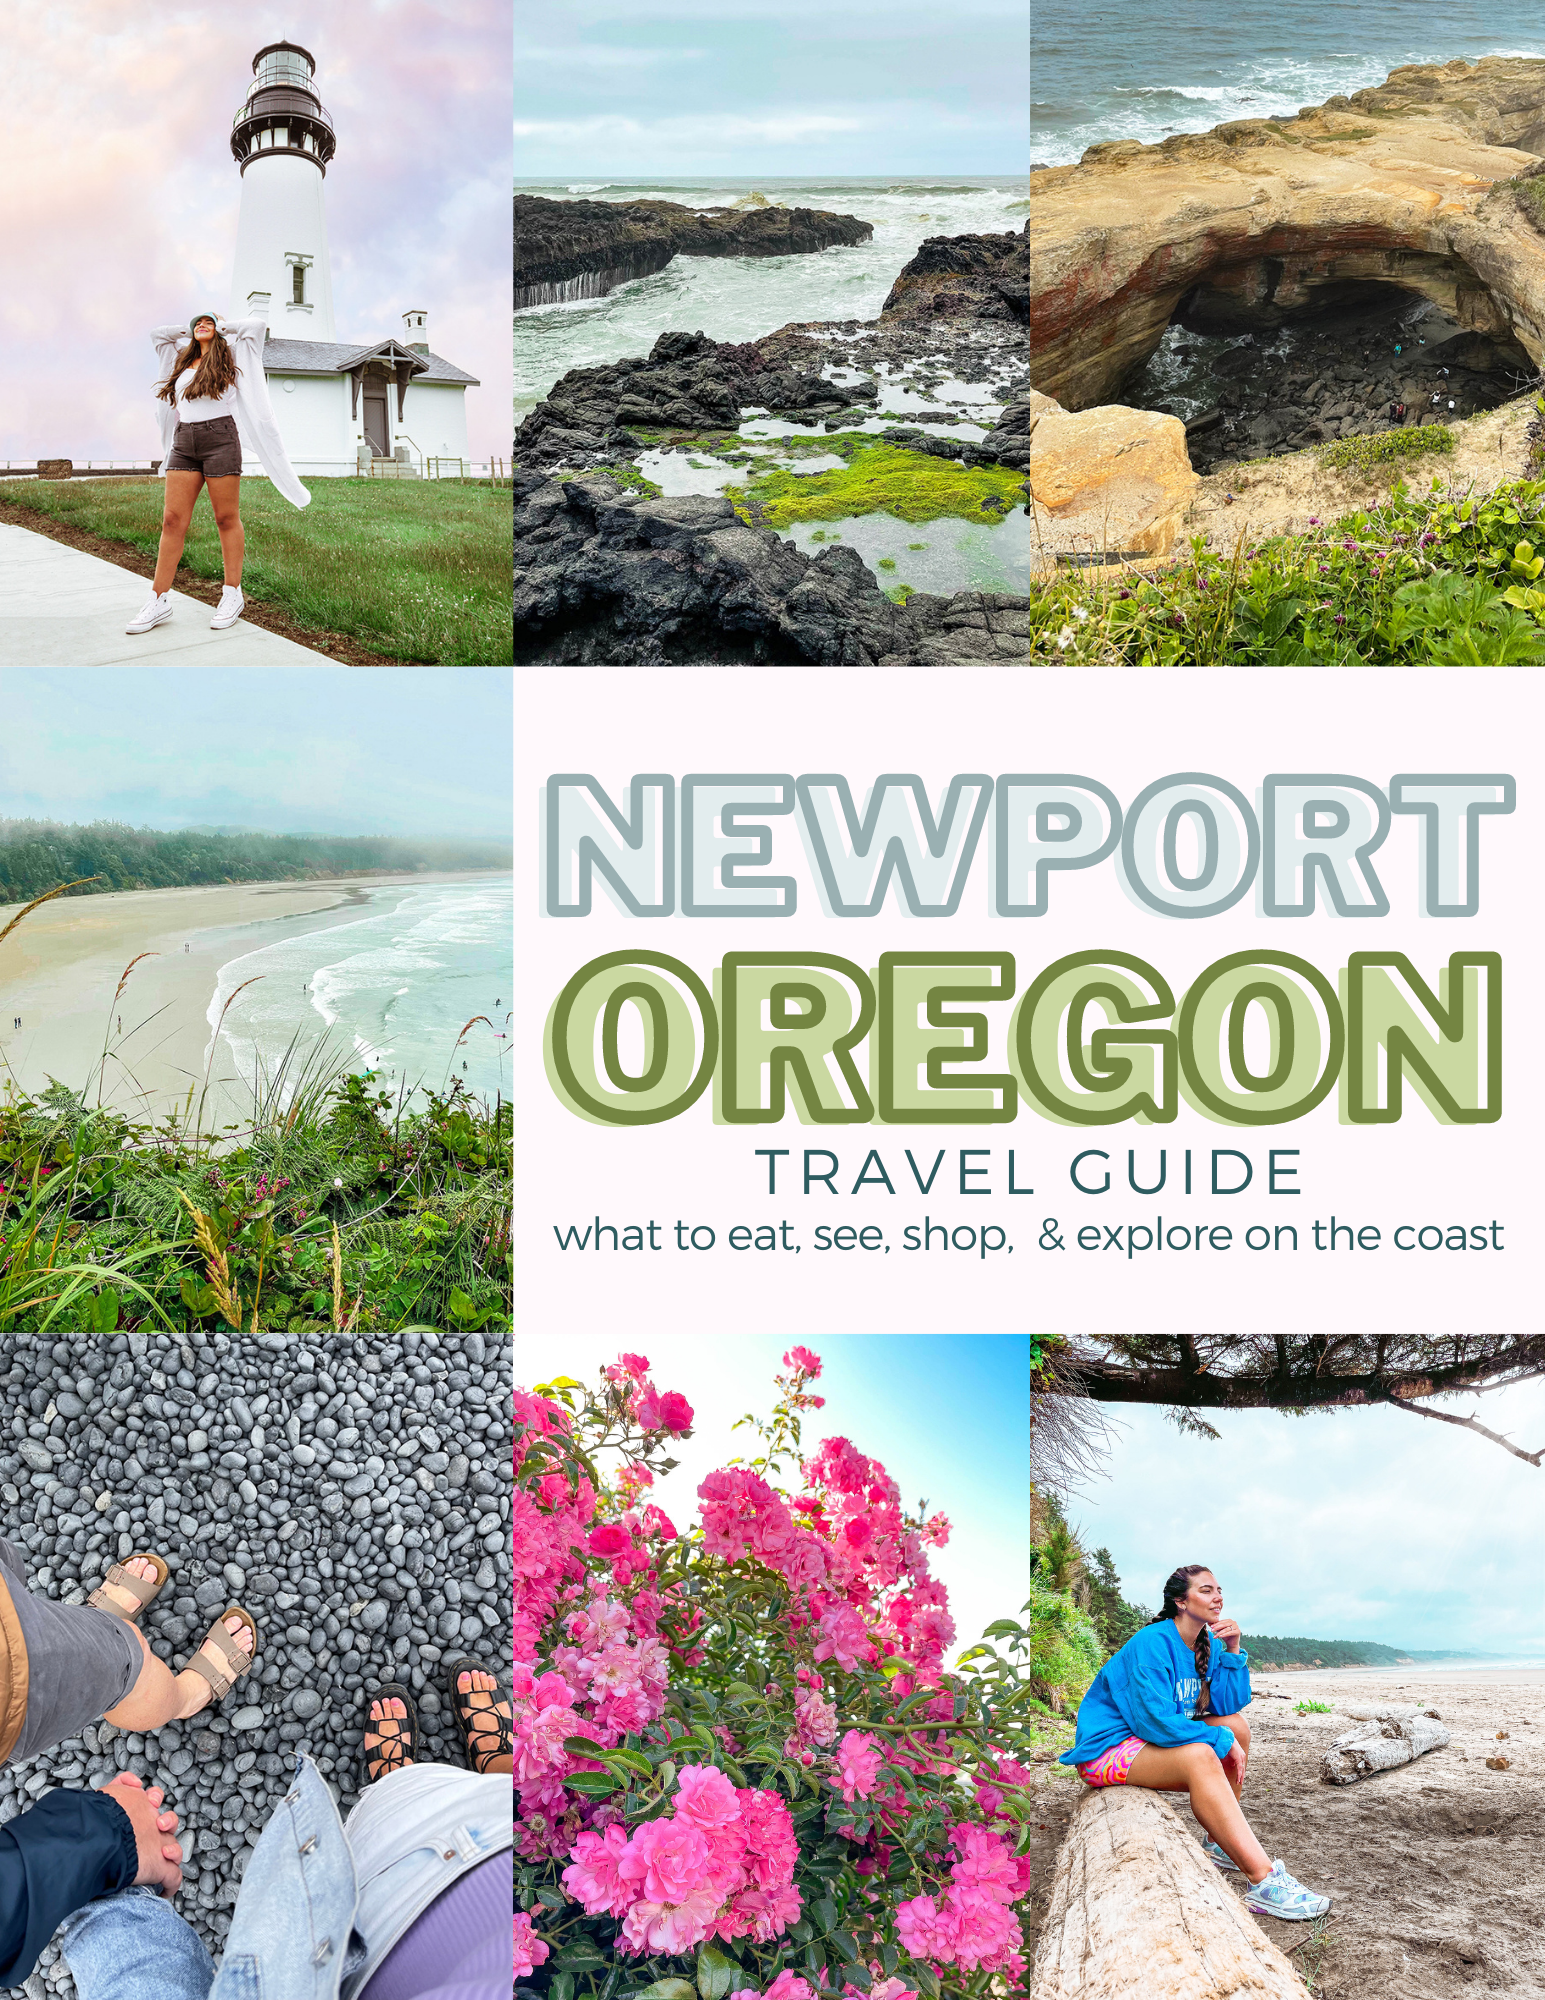 Travel guide for Newport. What to see, shop, eat, and explore on the Oregon coast